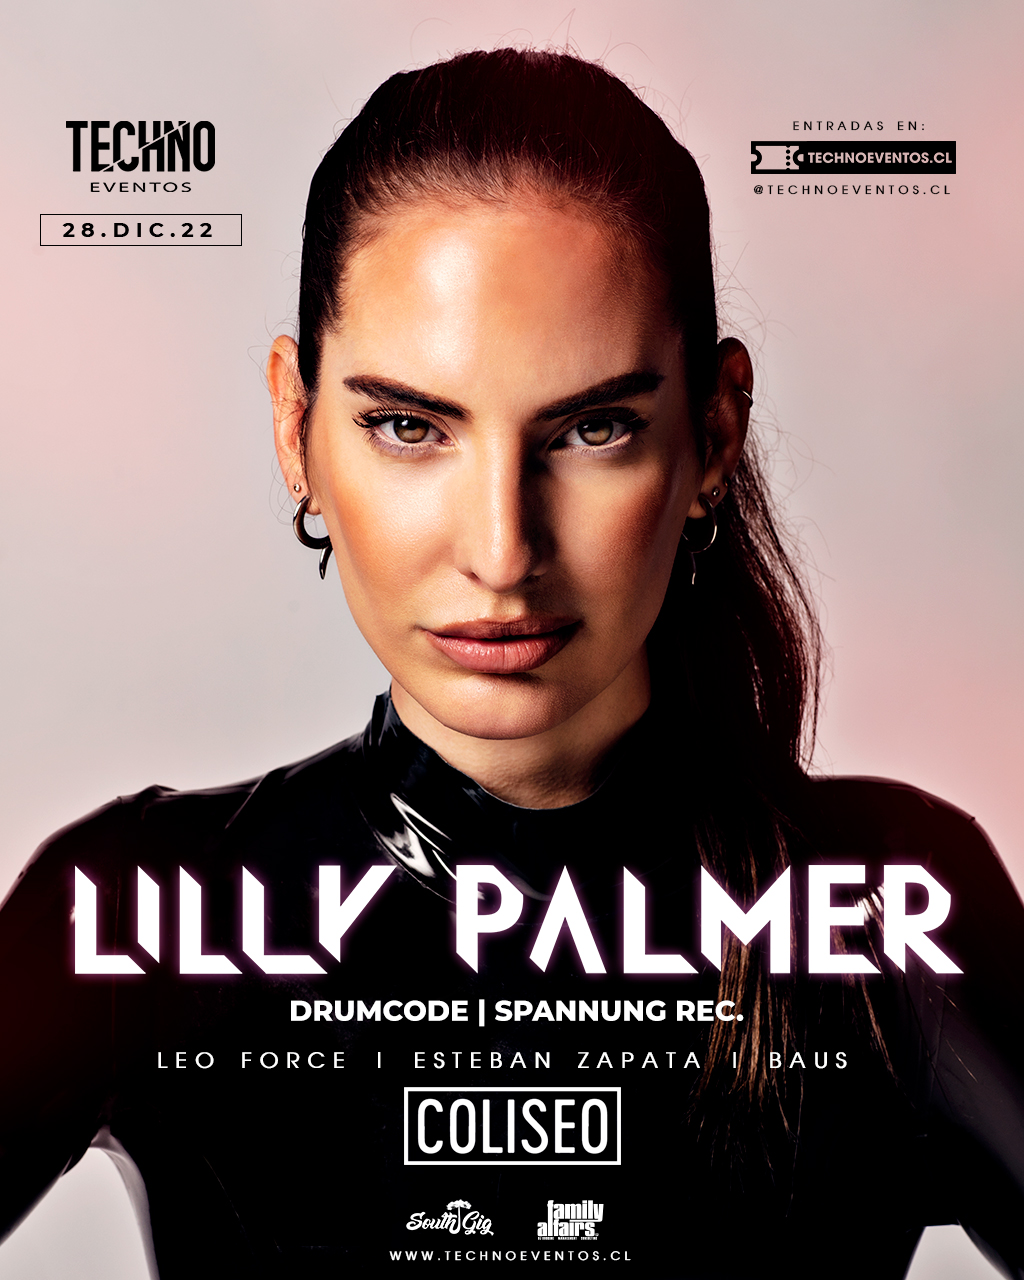 lilly palmer | mie.28.dic (teatro coliseo)